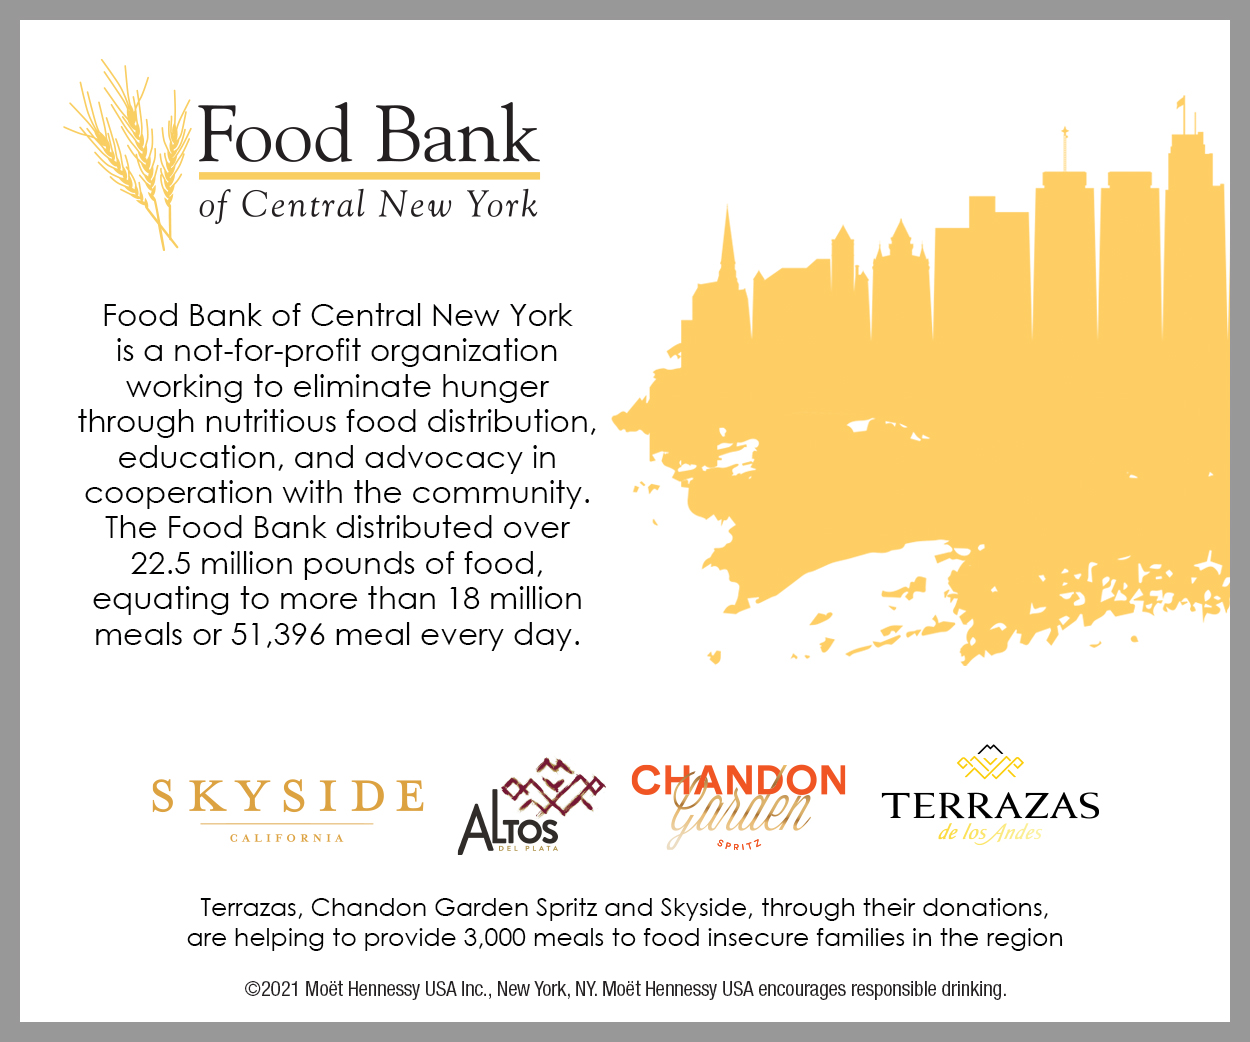 Events » Food Bank of Central New York